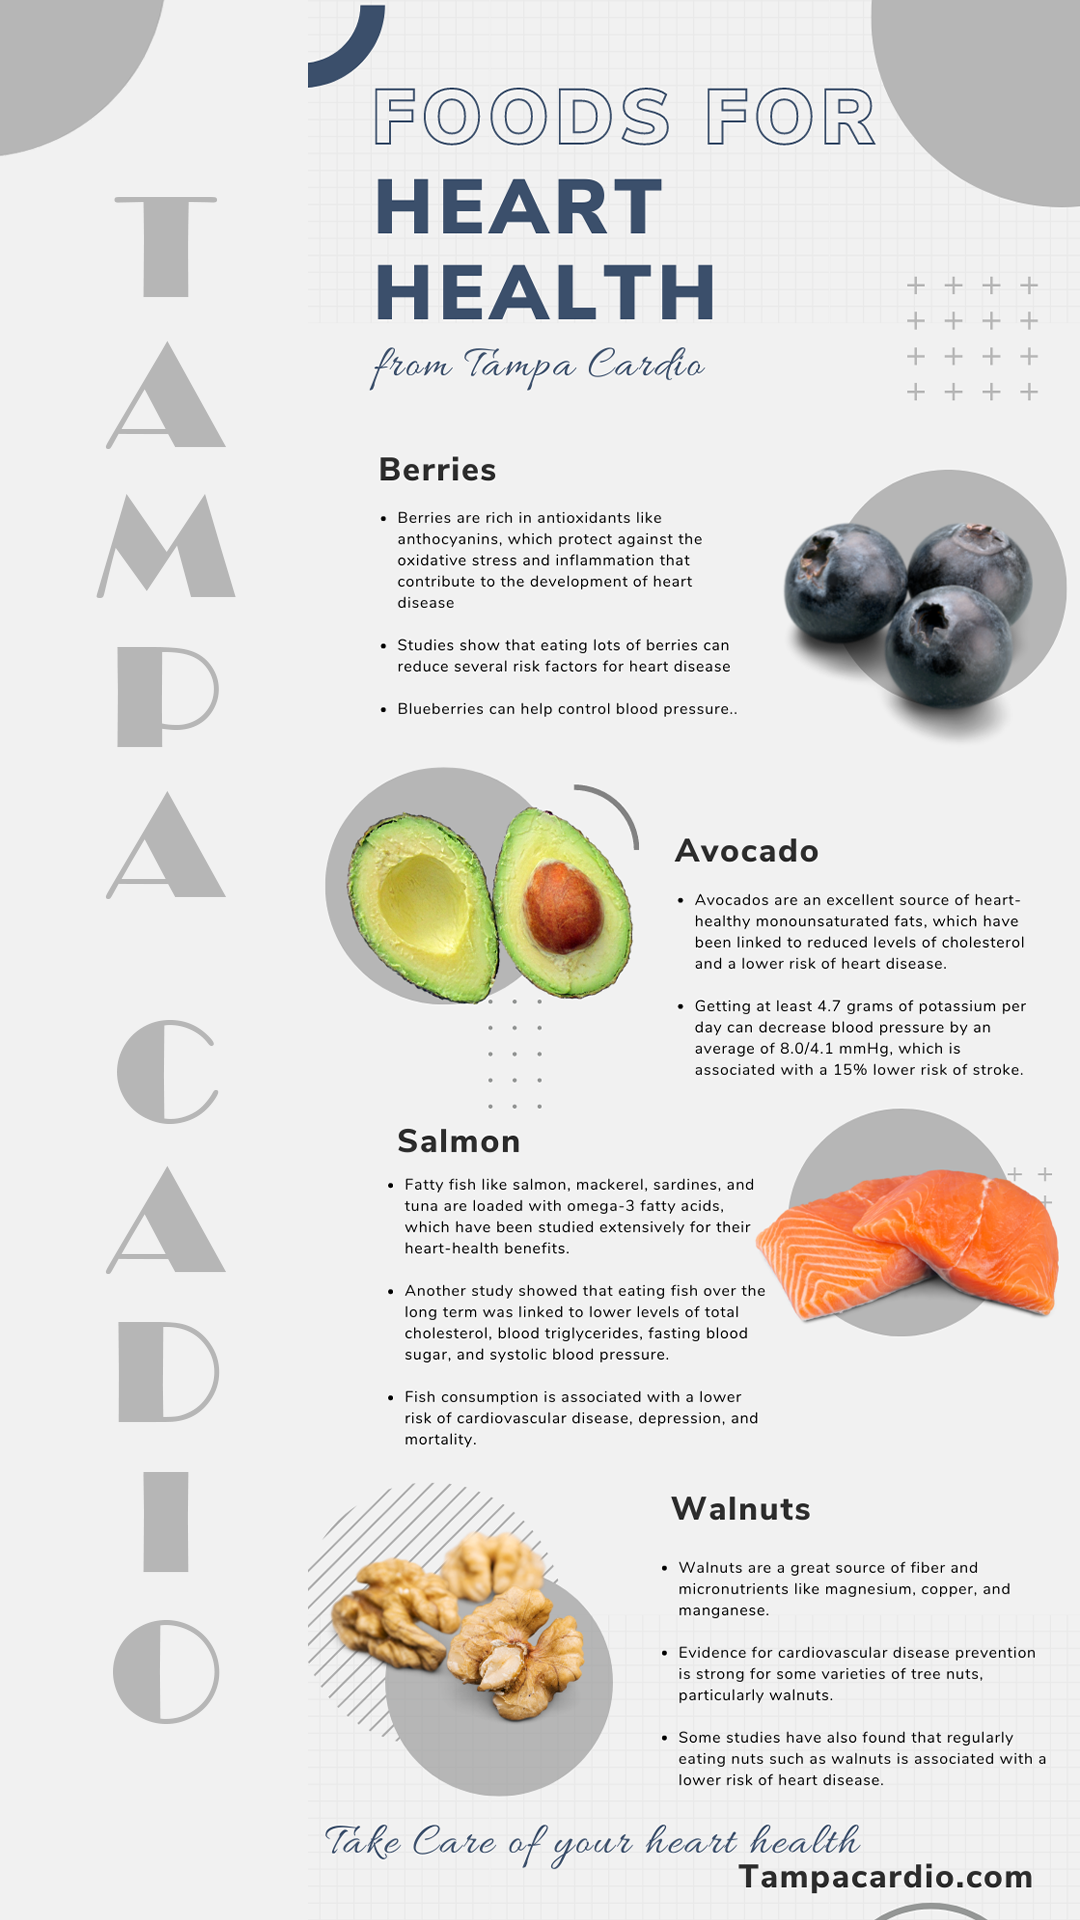 Tampa Cardio Heart healthy foods infographic